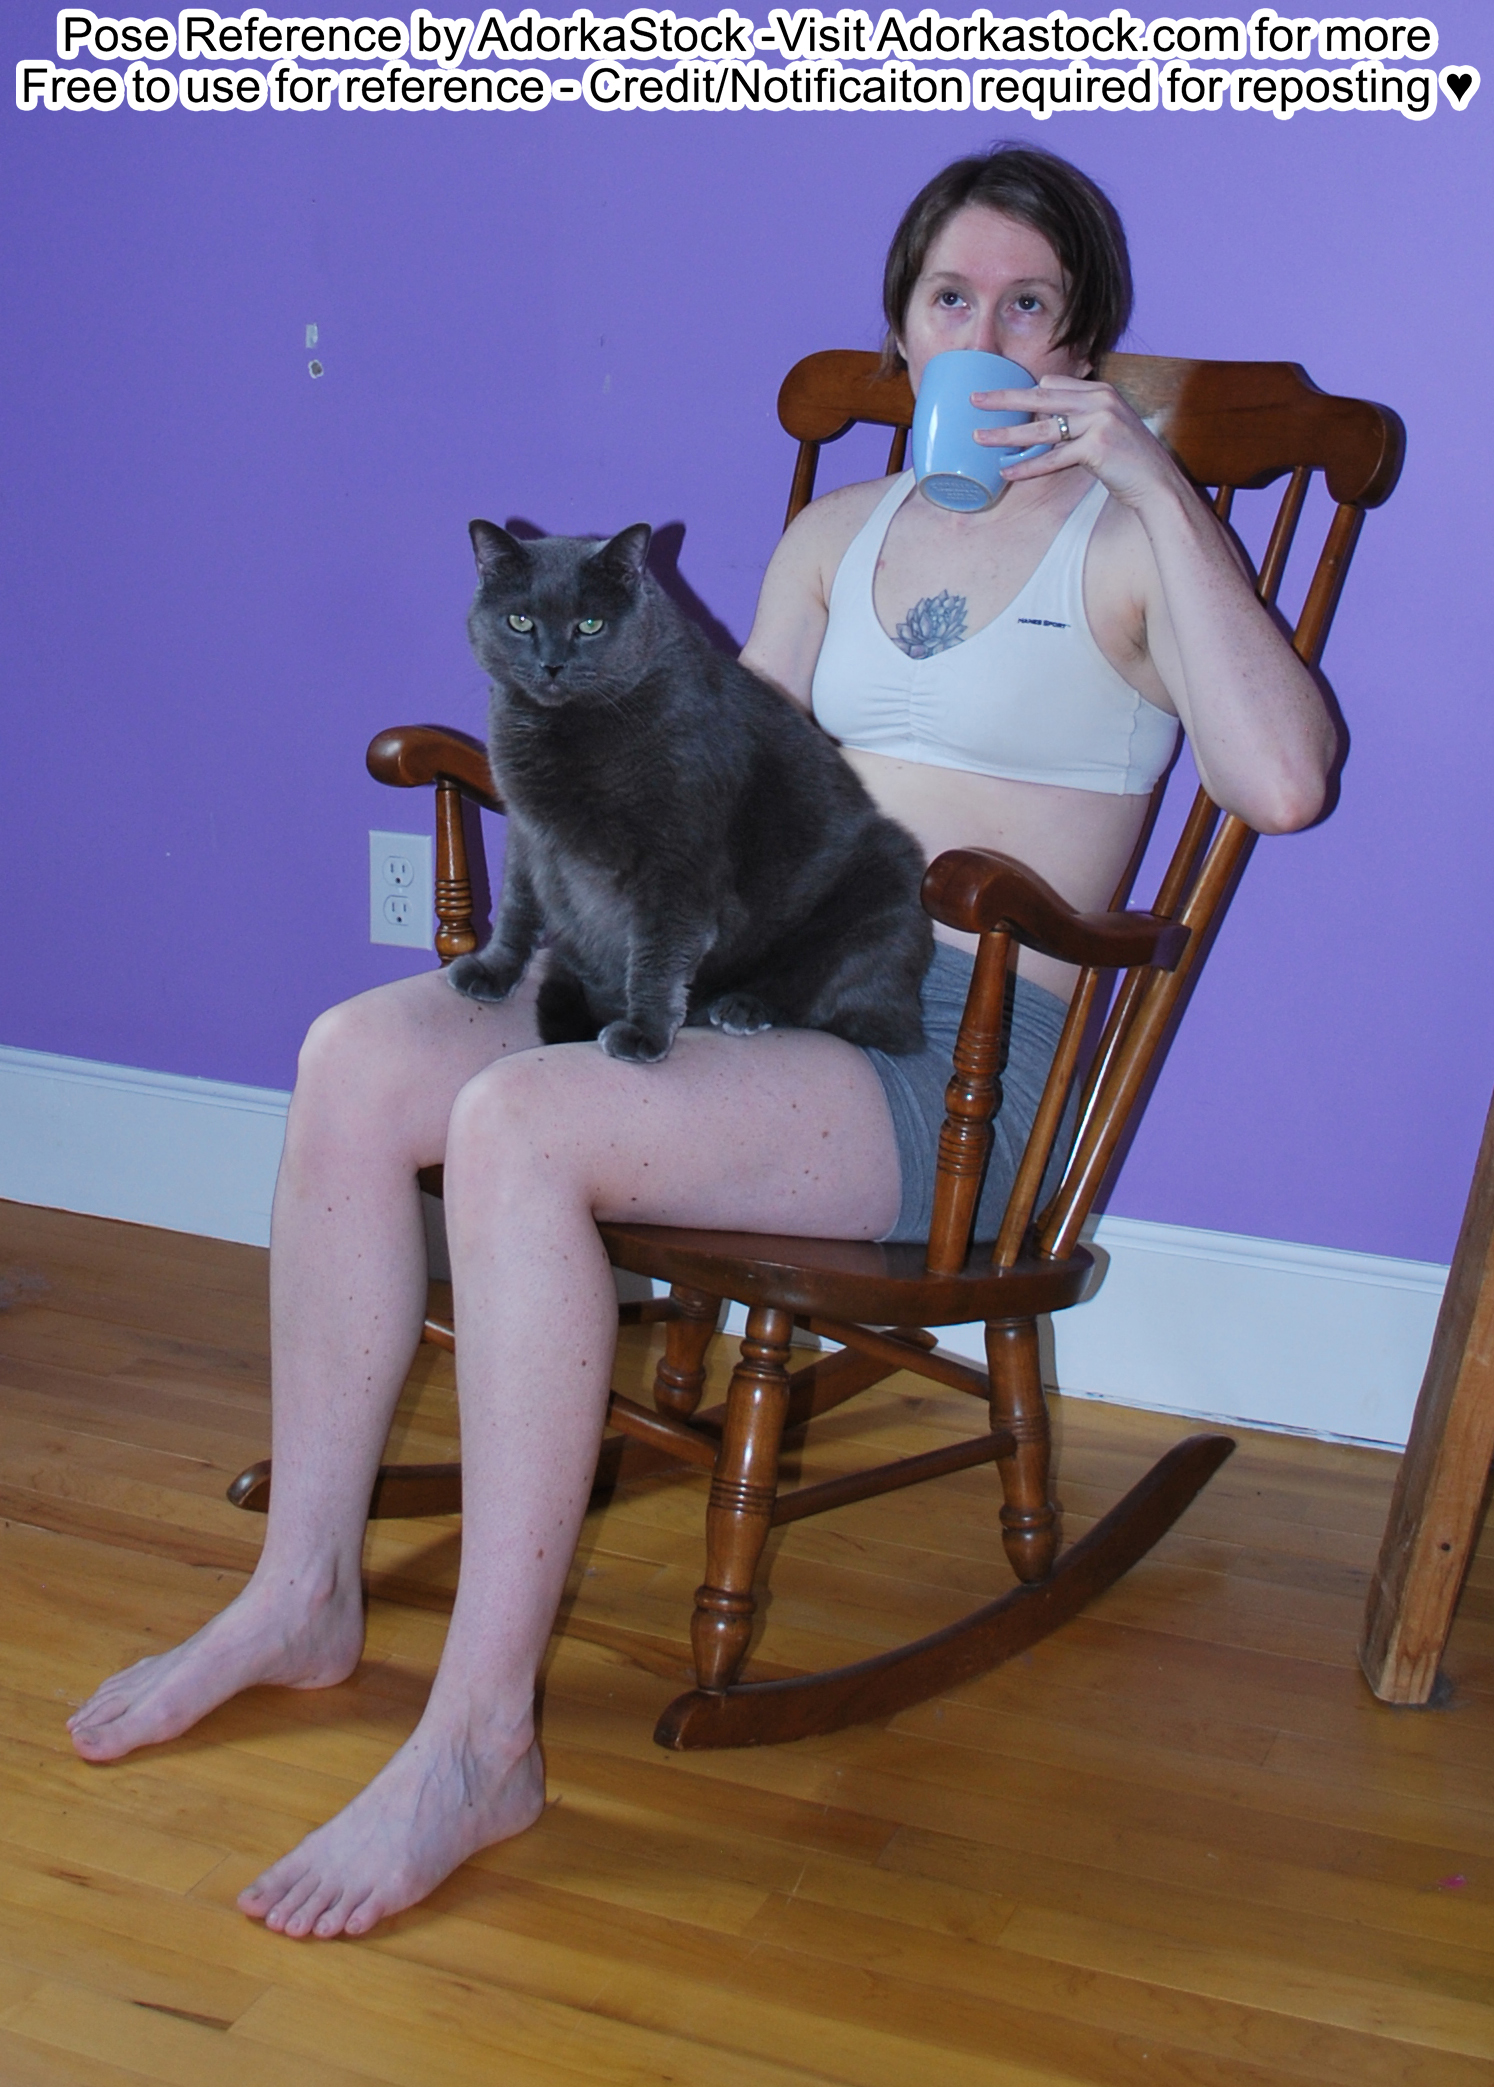 thin, white, female pose reference model in rocking chair pose with a large gray cat on her lap while she sips a mug